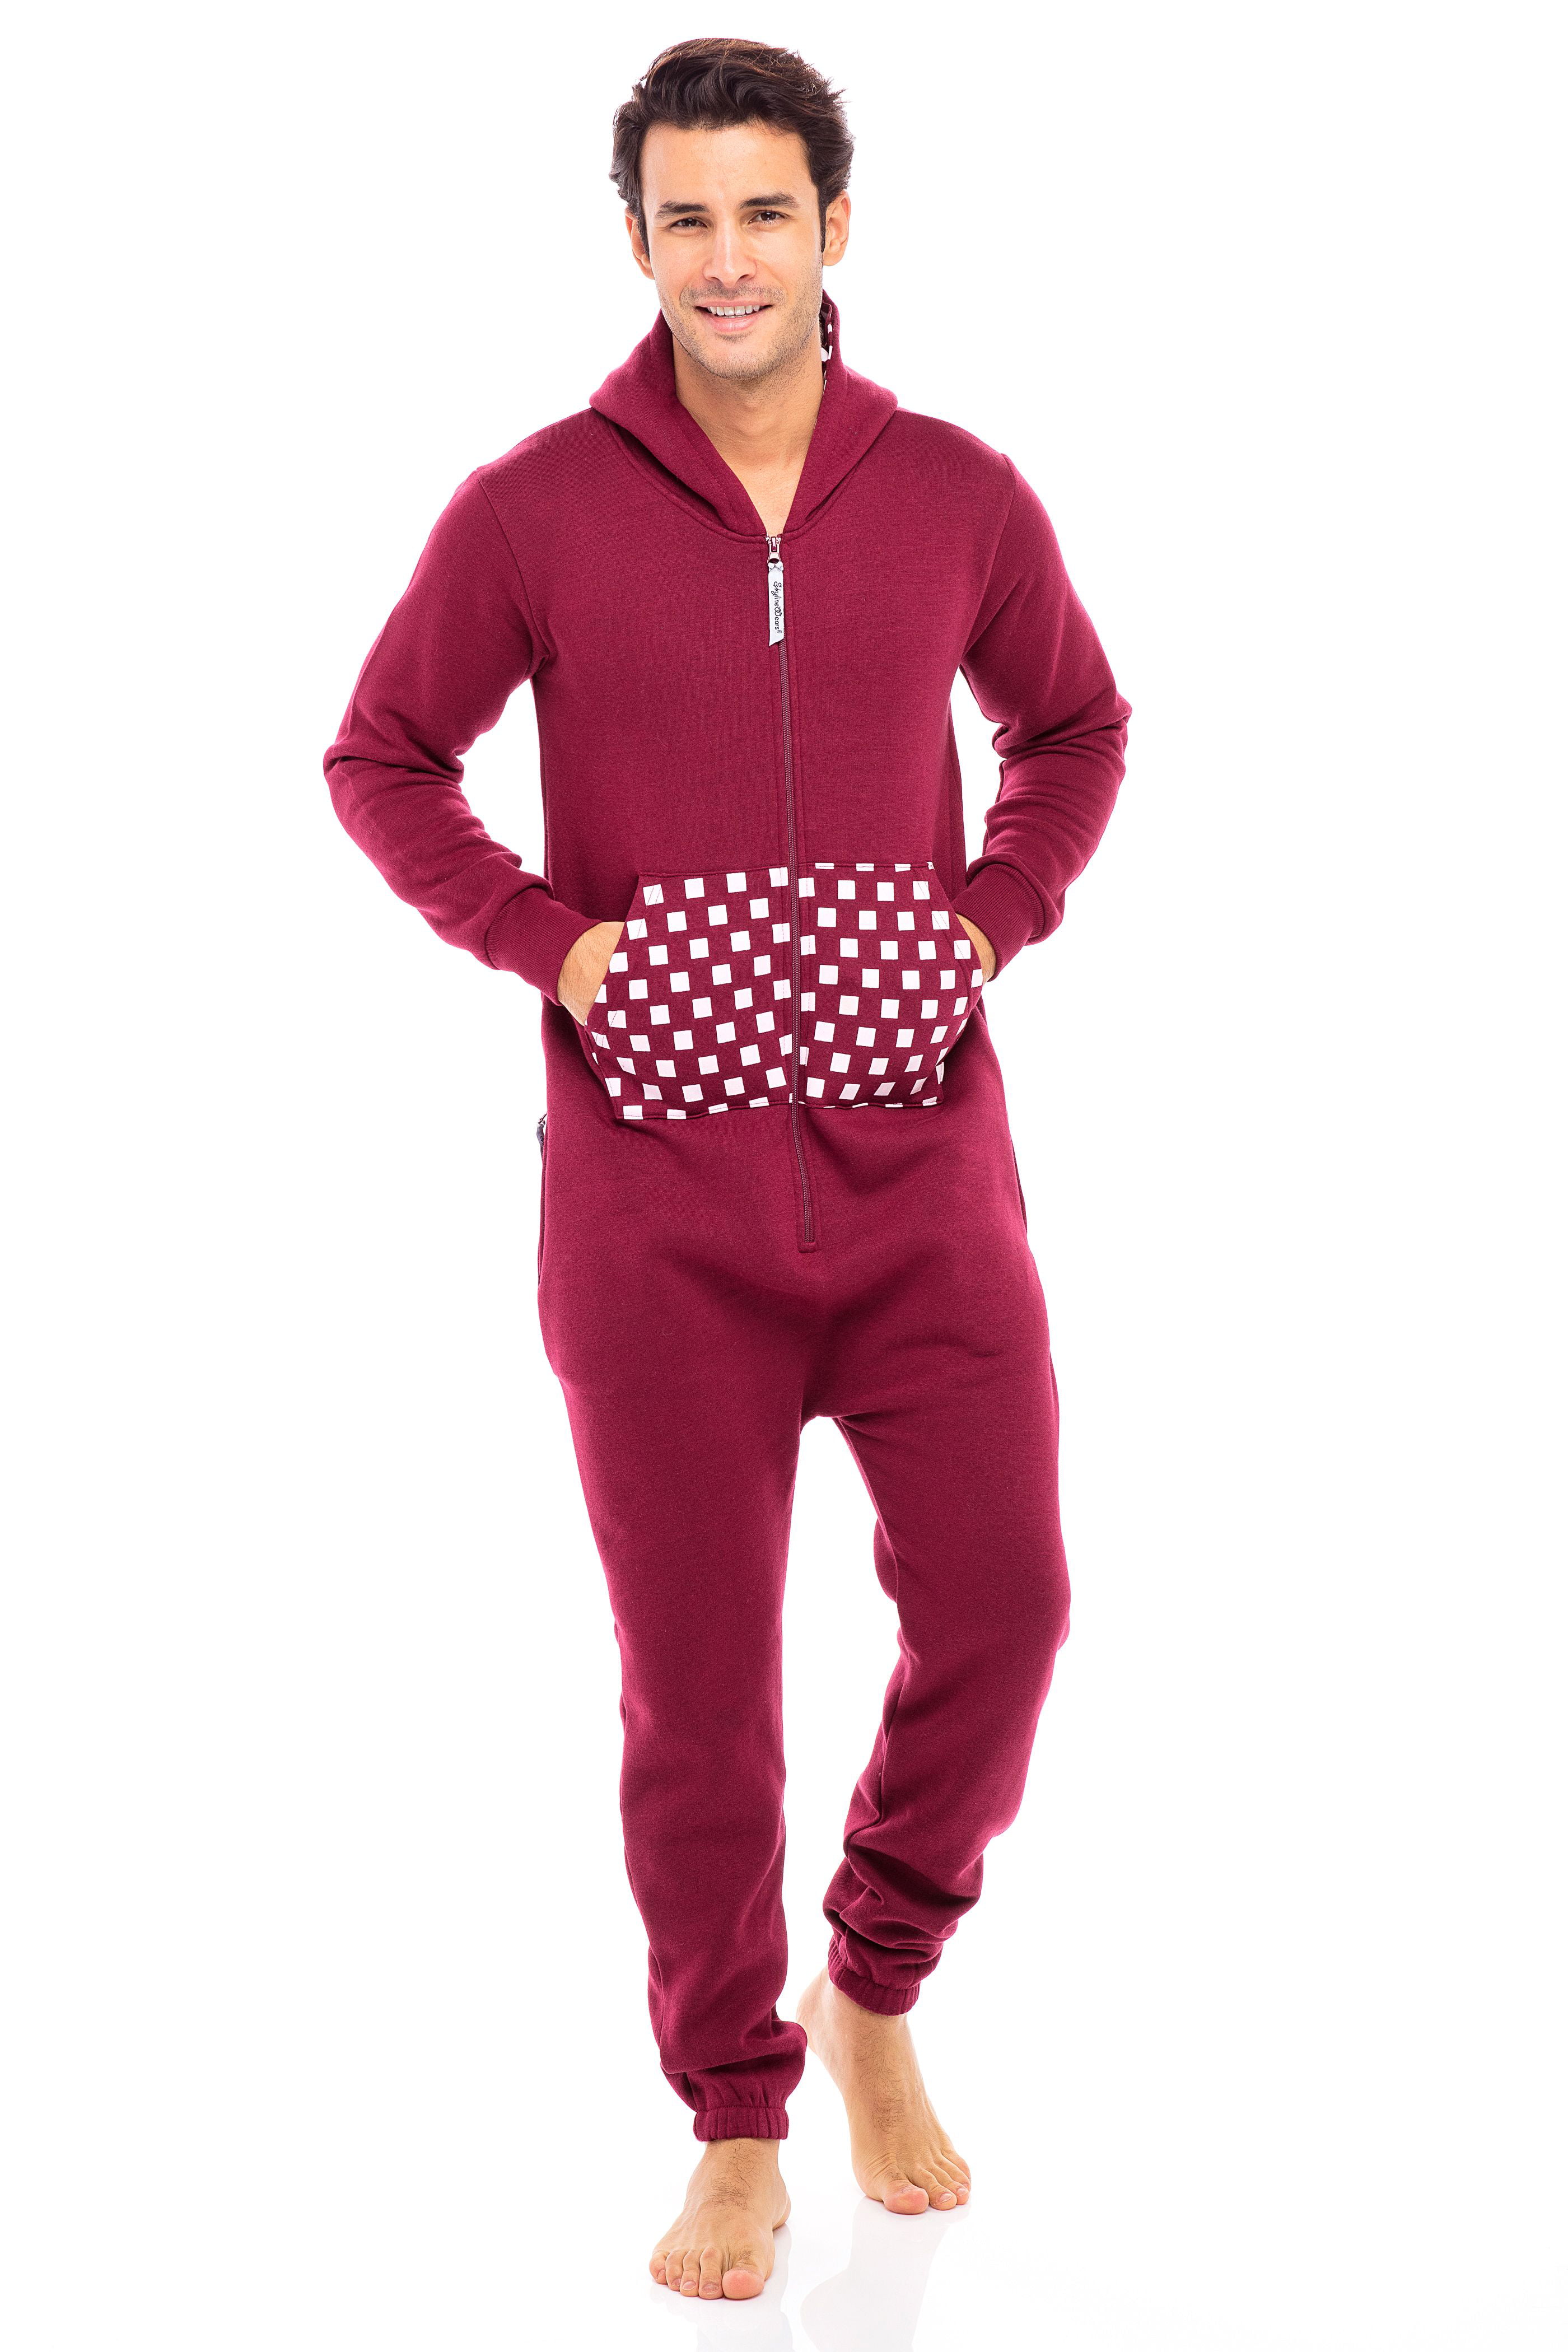 KESEPLEI Adult Non-Footed Onesies，One-Piece Pajama Jumpsuits for Men and Women